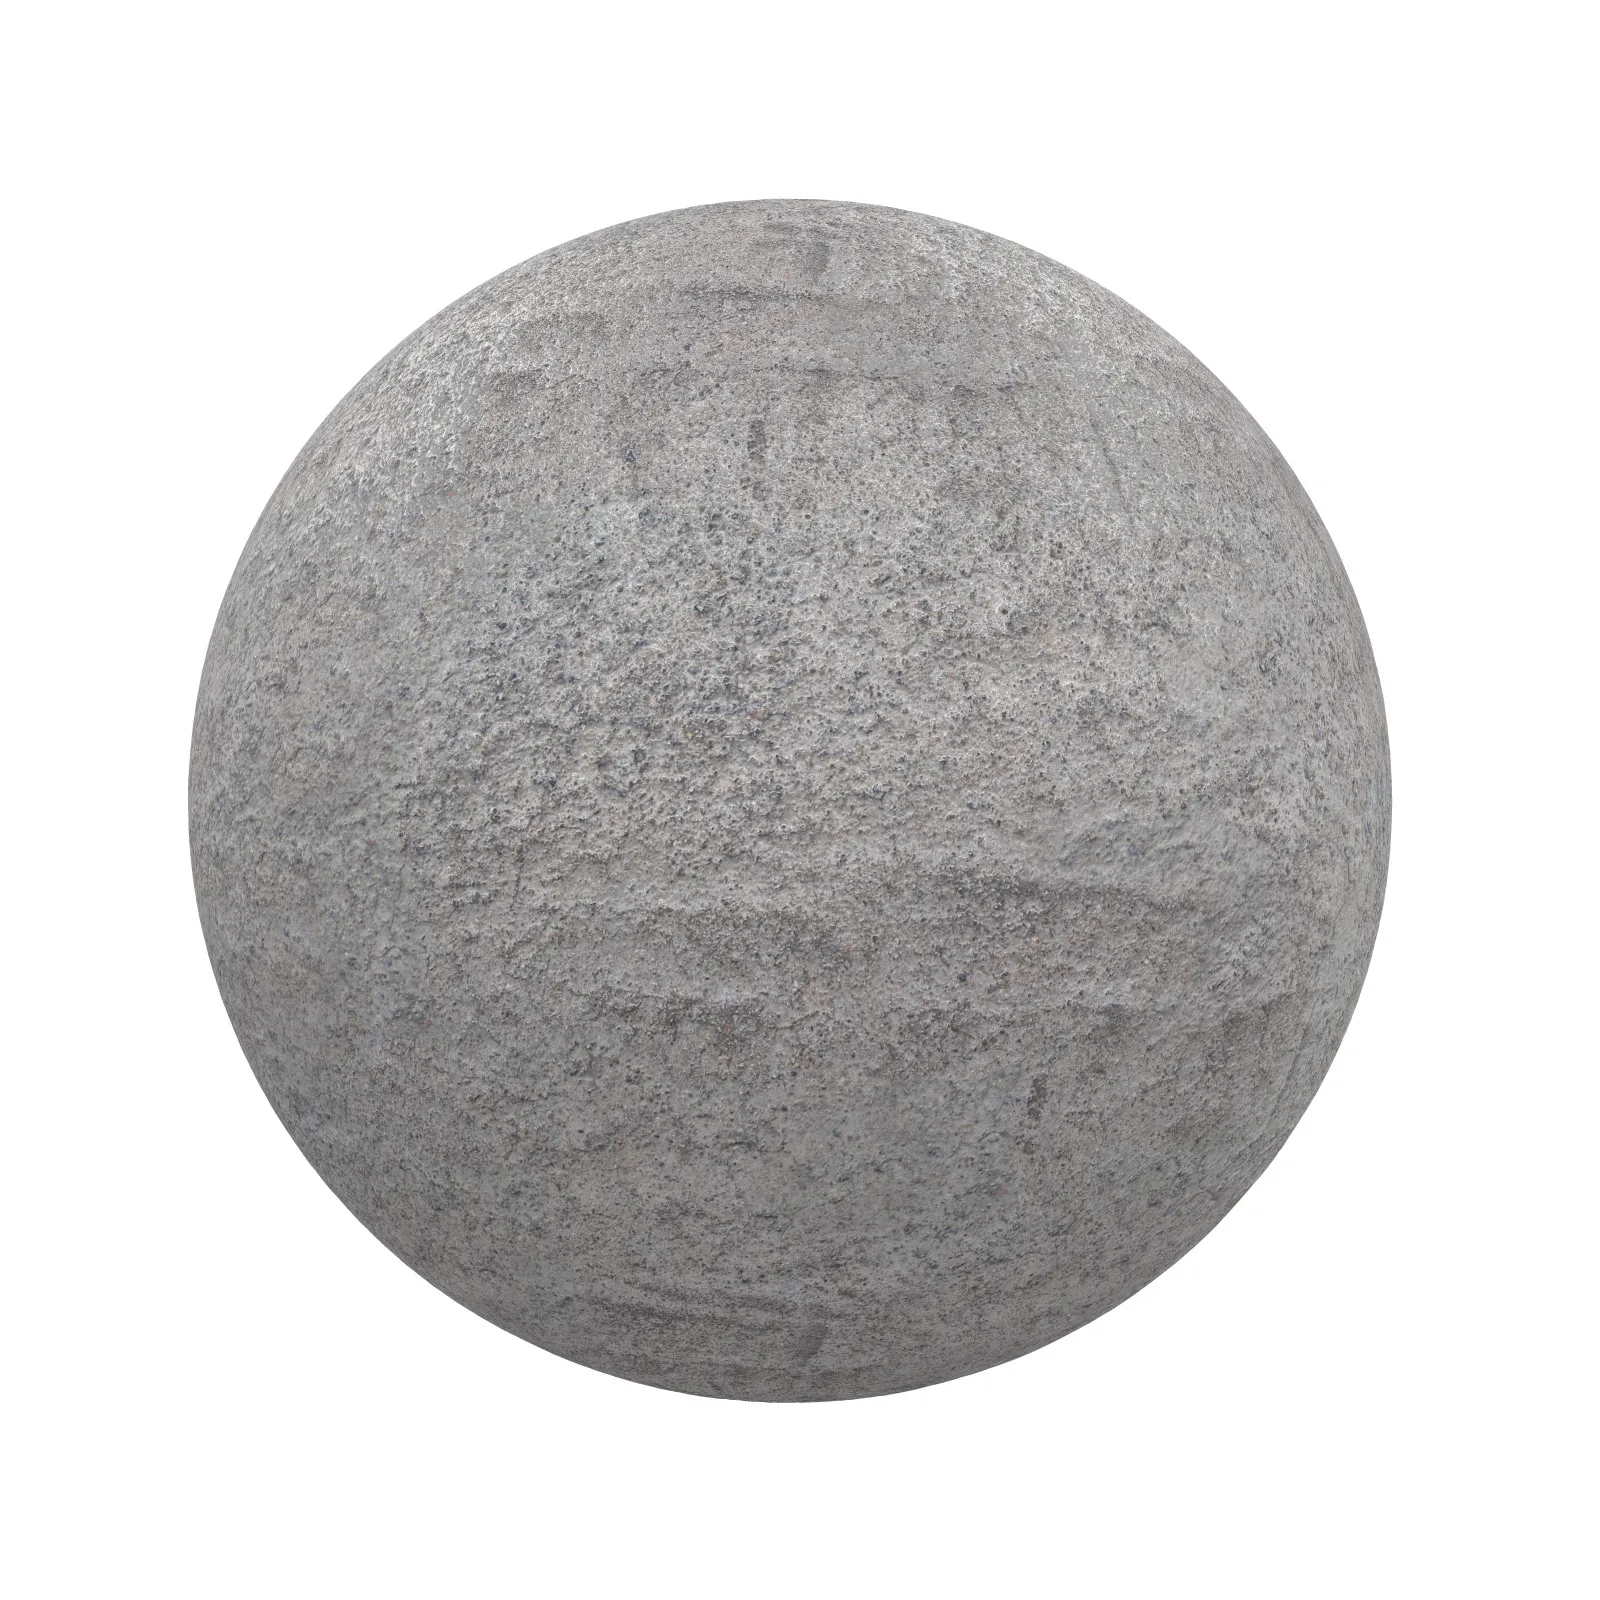 TEXTURES – STONES – CGAxis PBR Colection Vol 1 Stones – grey stone 1